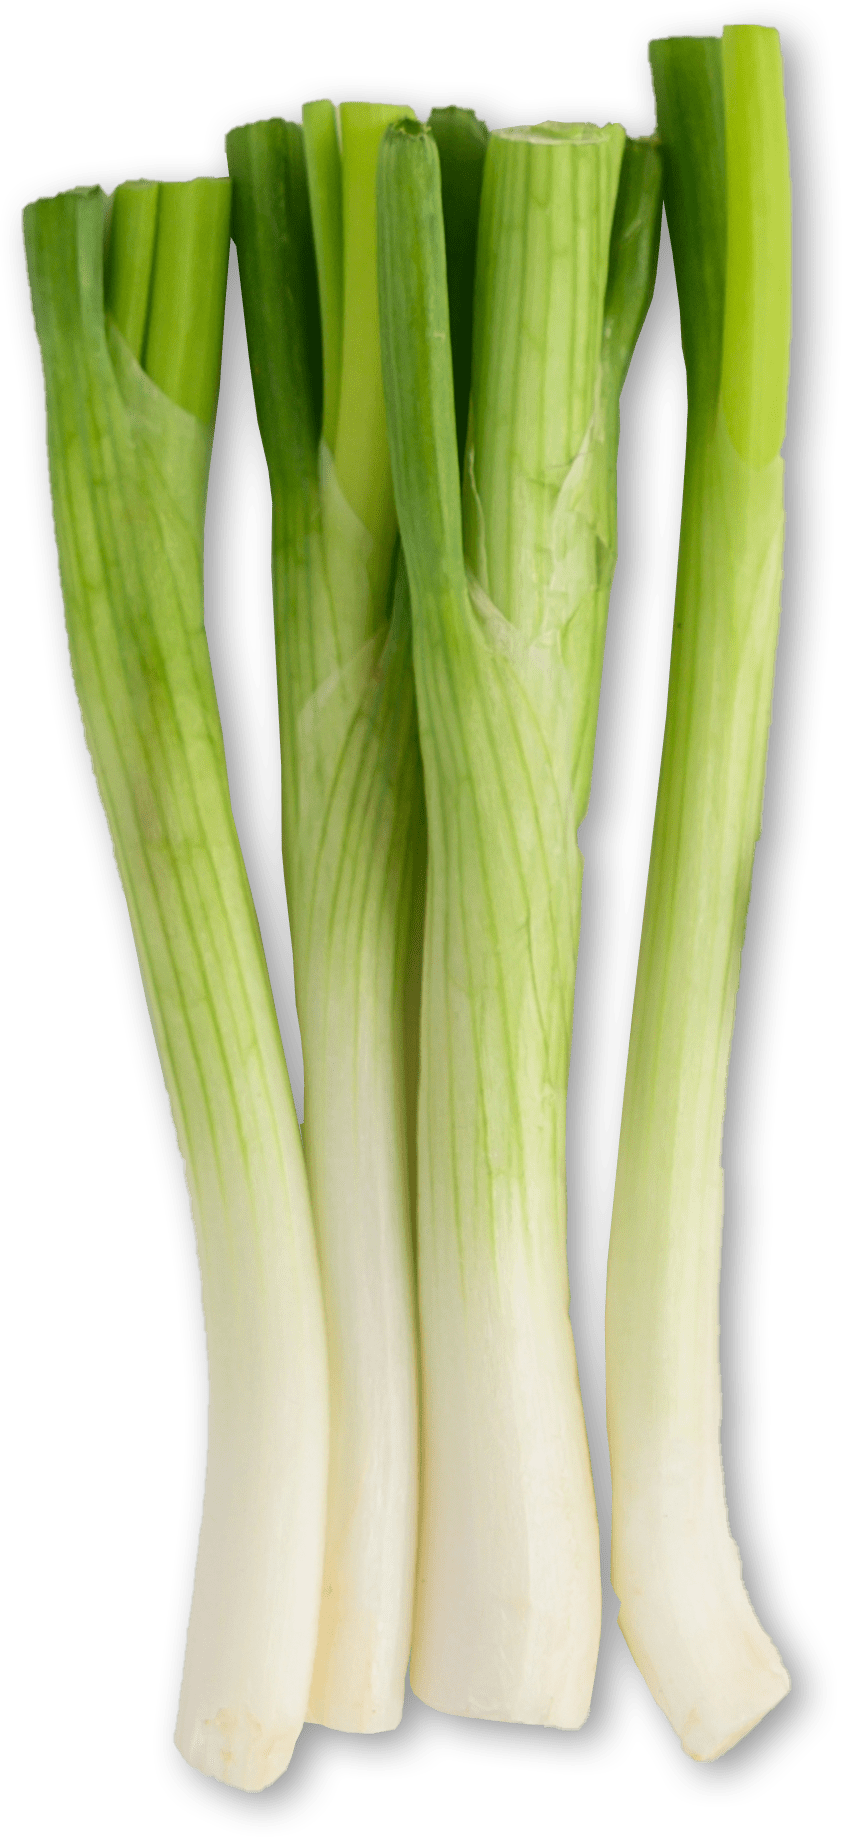 Top 10 hydroponic fruits & vegetables - spring onion, best things to grow hydroponics